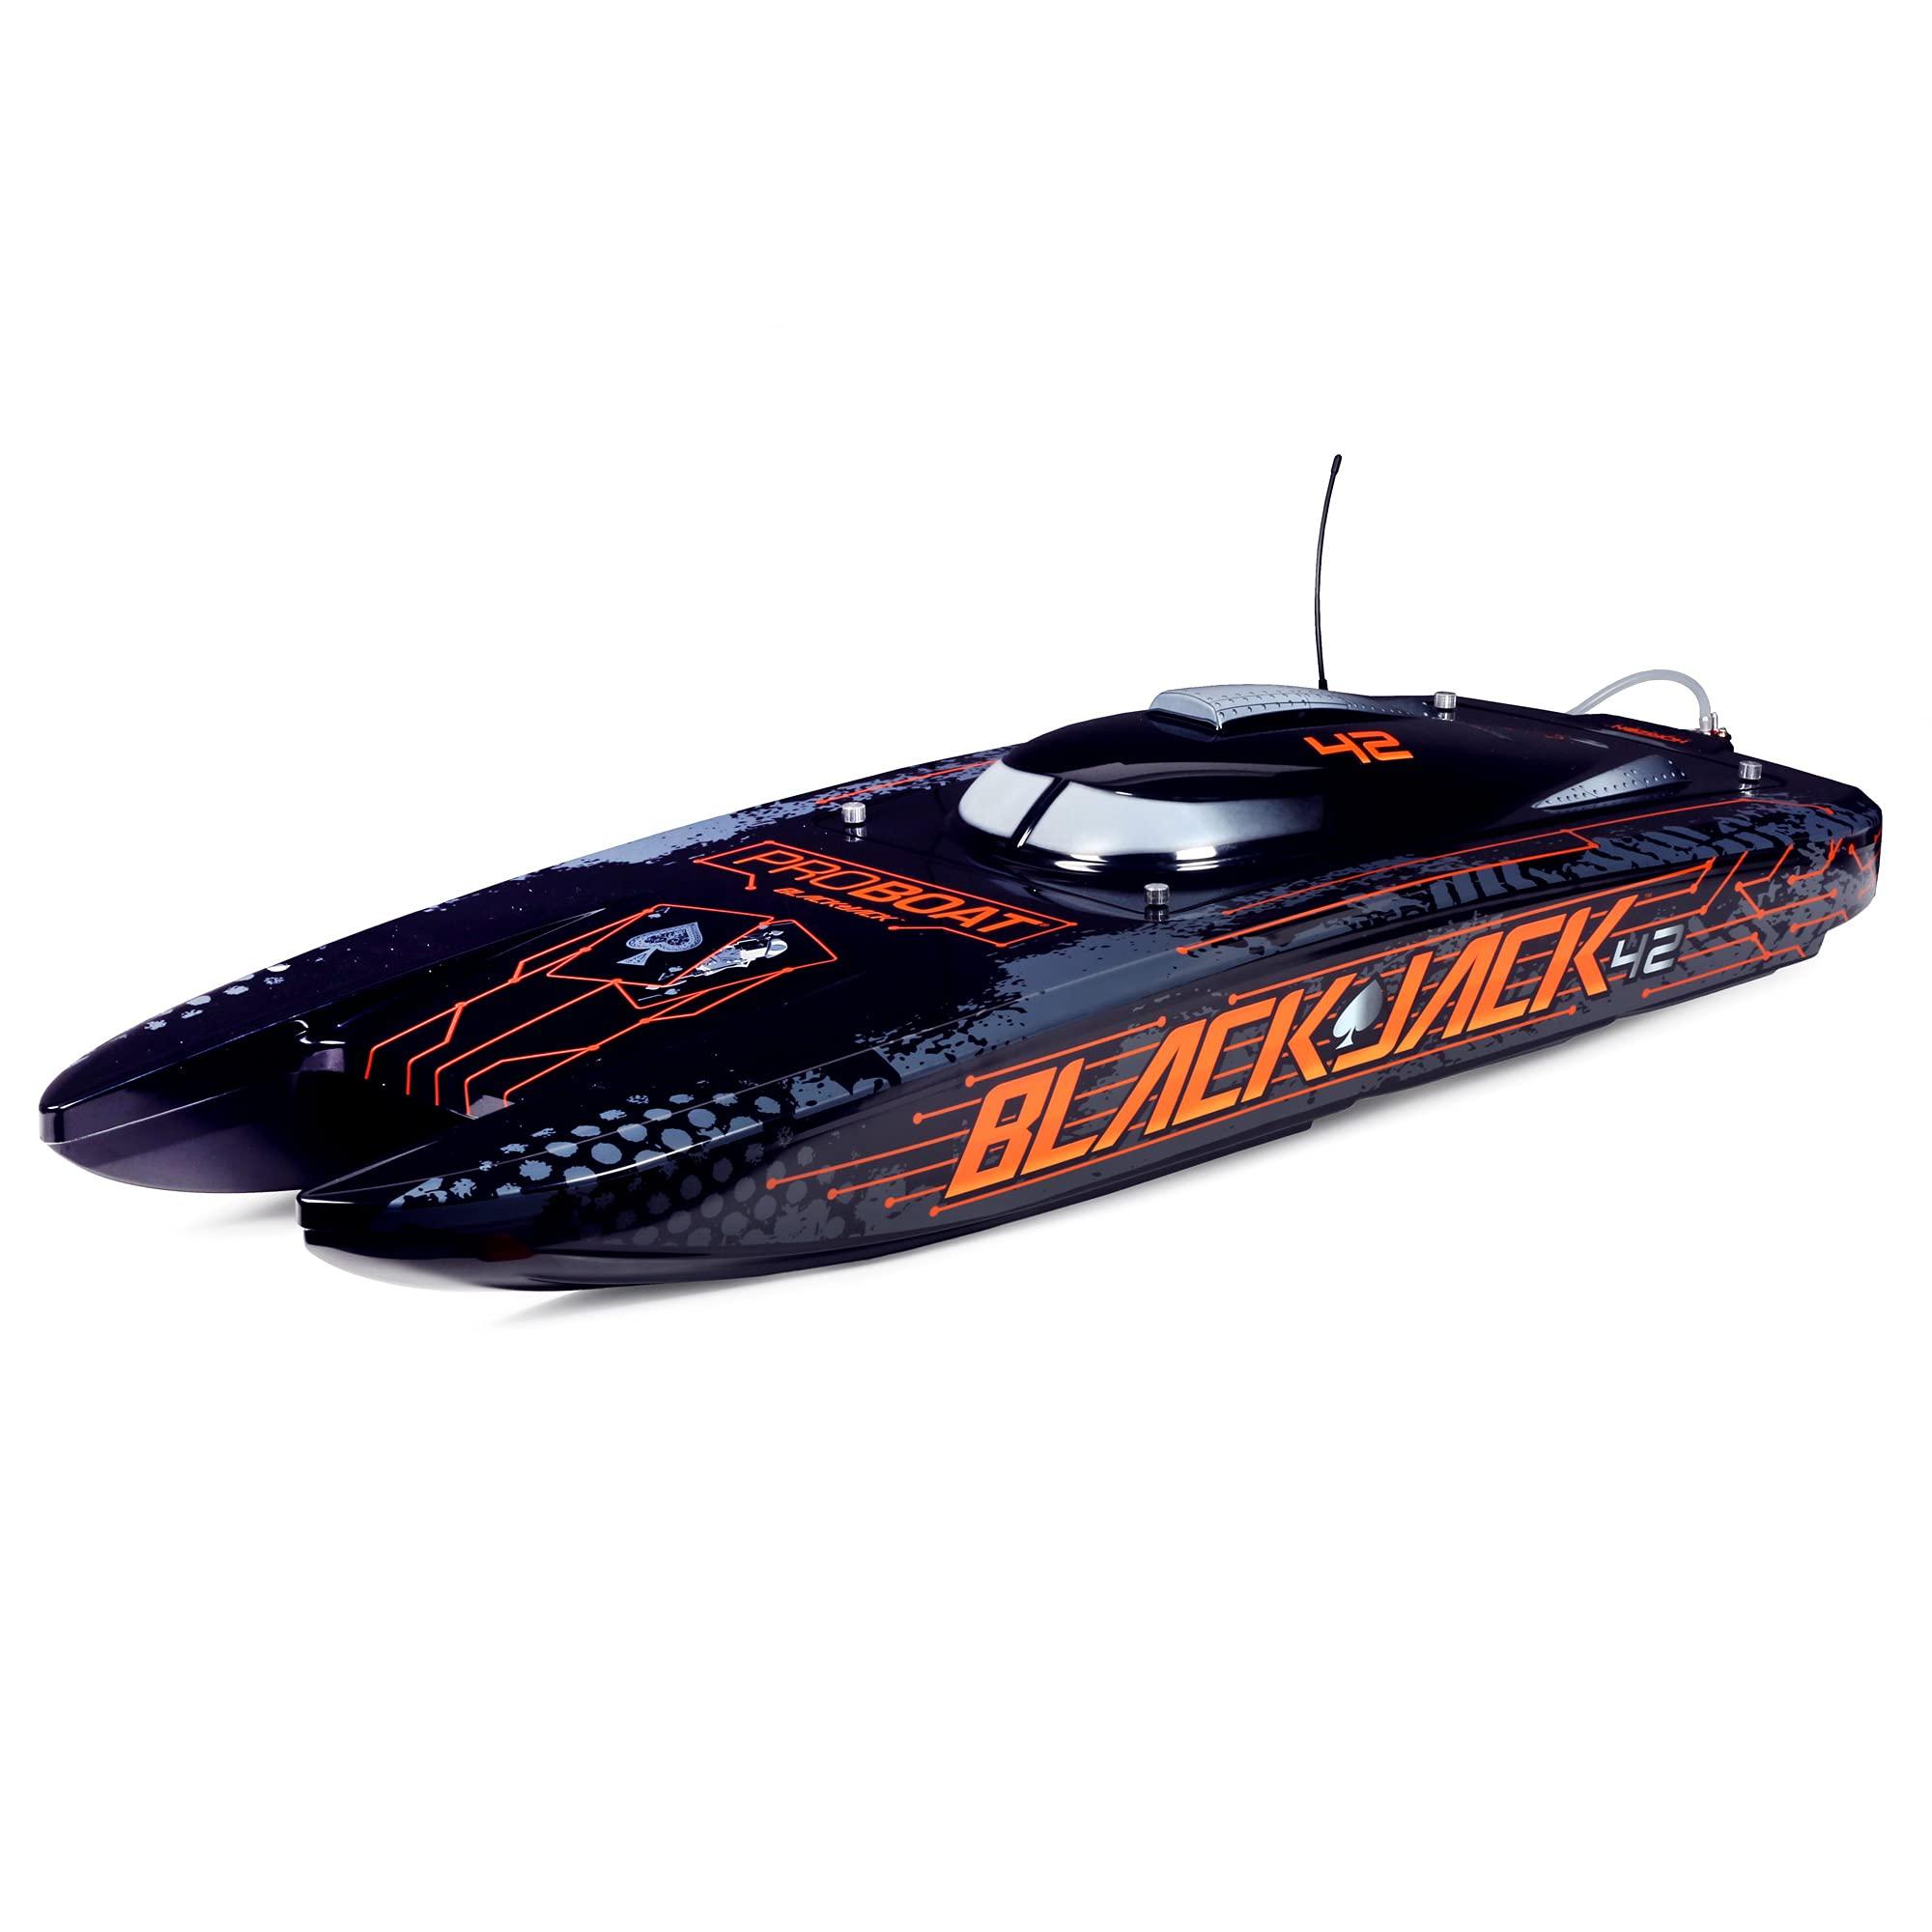 Proboat Blackjack 26: Top Choice for Remote-Controlled Boats: Proboat Blackjack 26 Specs and Features